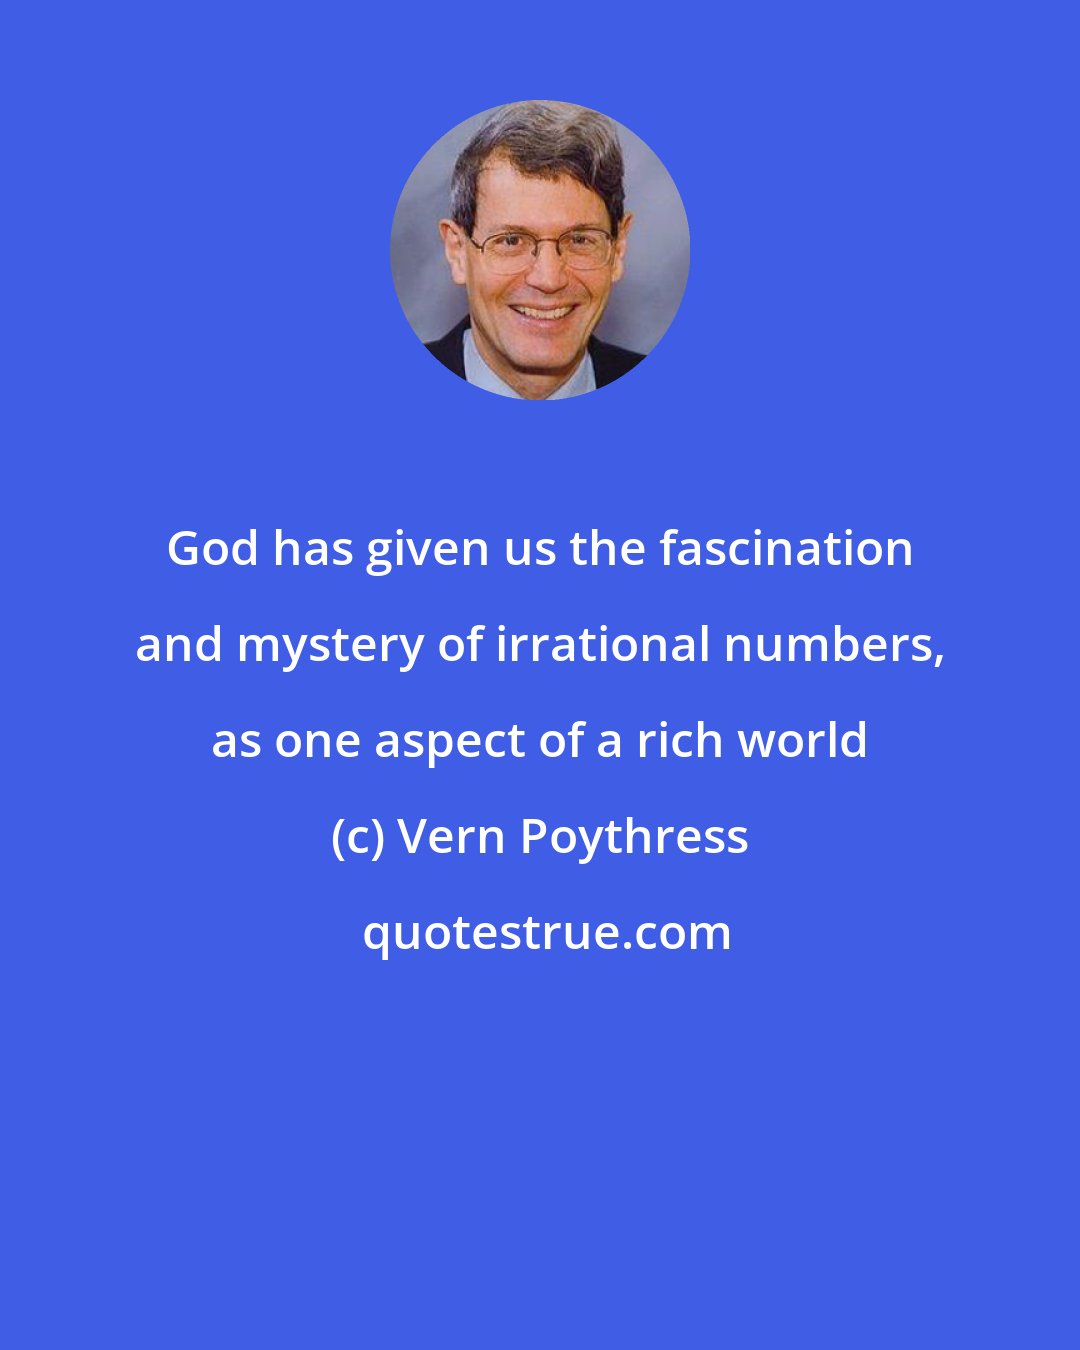 Vern Poythress: God has given us the fascination and mystery of irrational numbers, as one aspect of a rich world